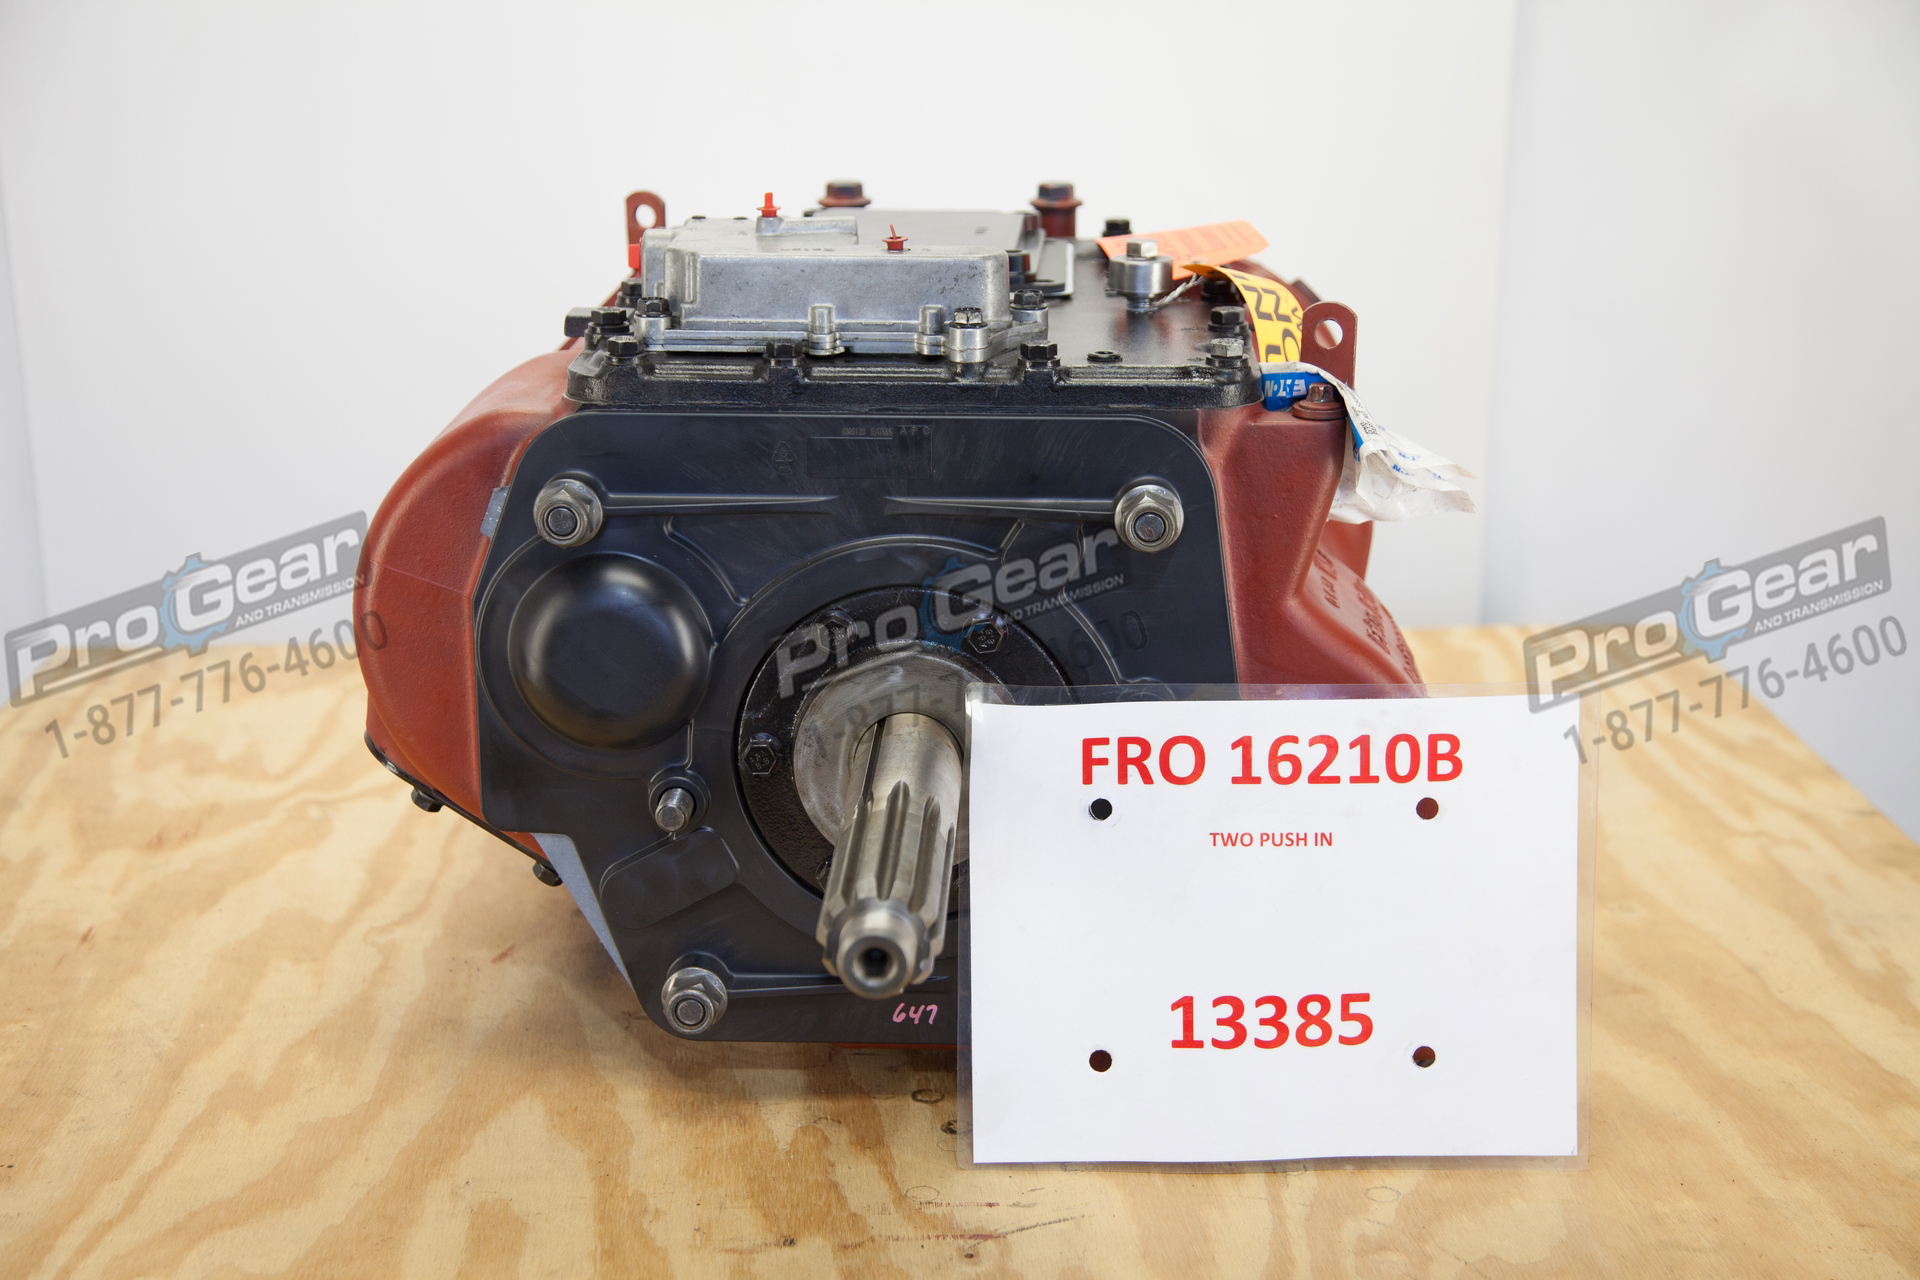 Eaton Fuller RTLO-20918A-AS2 transmission